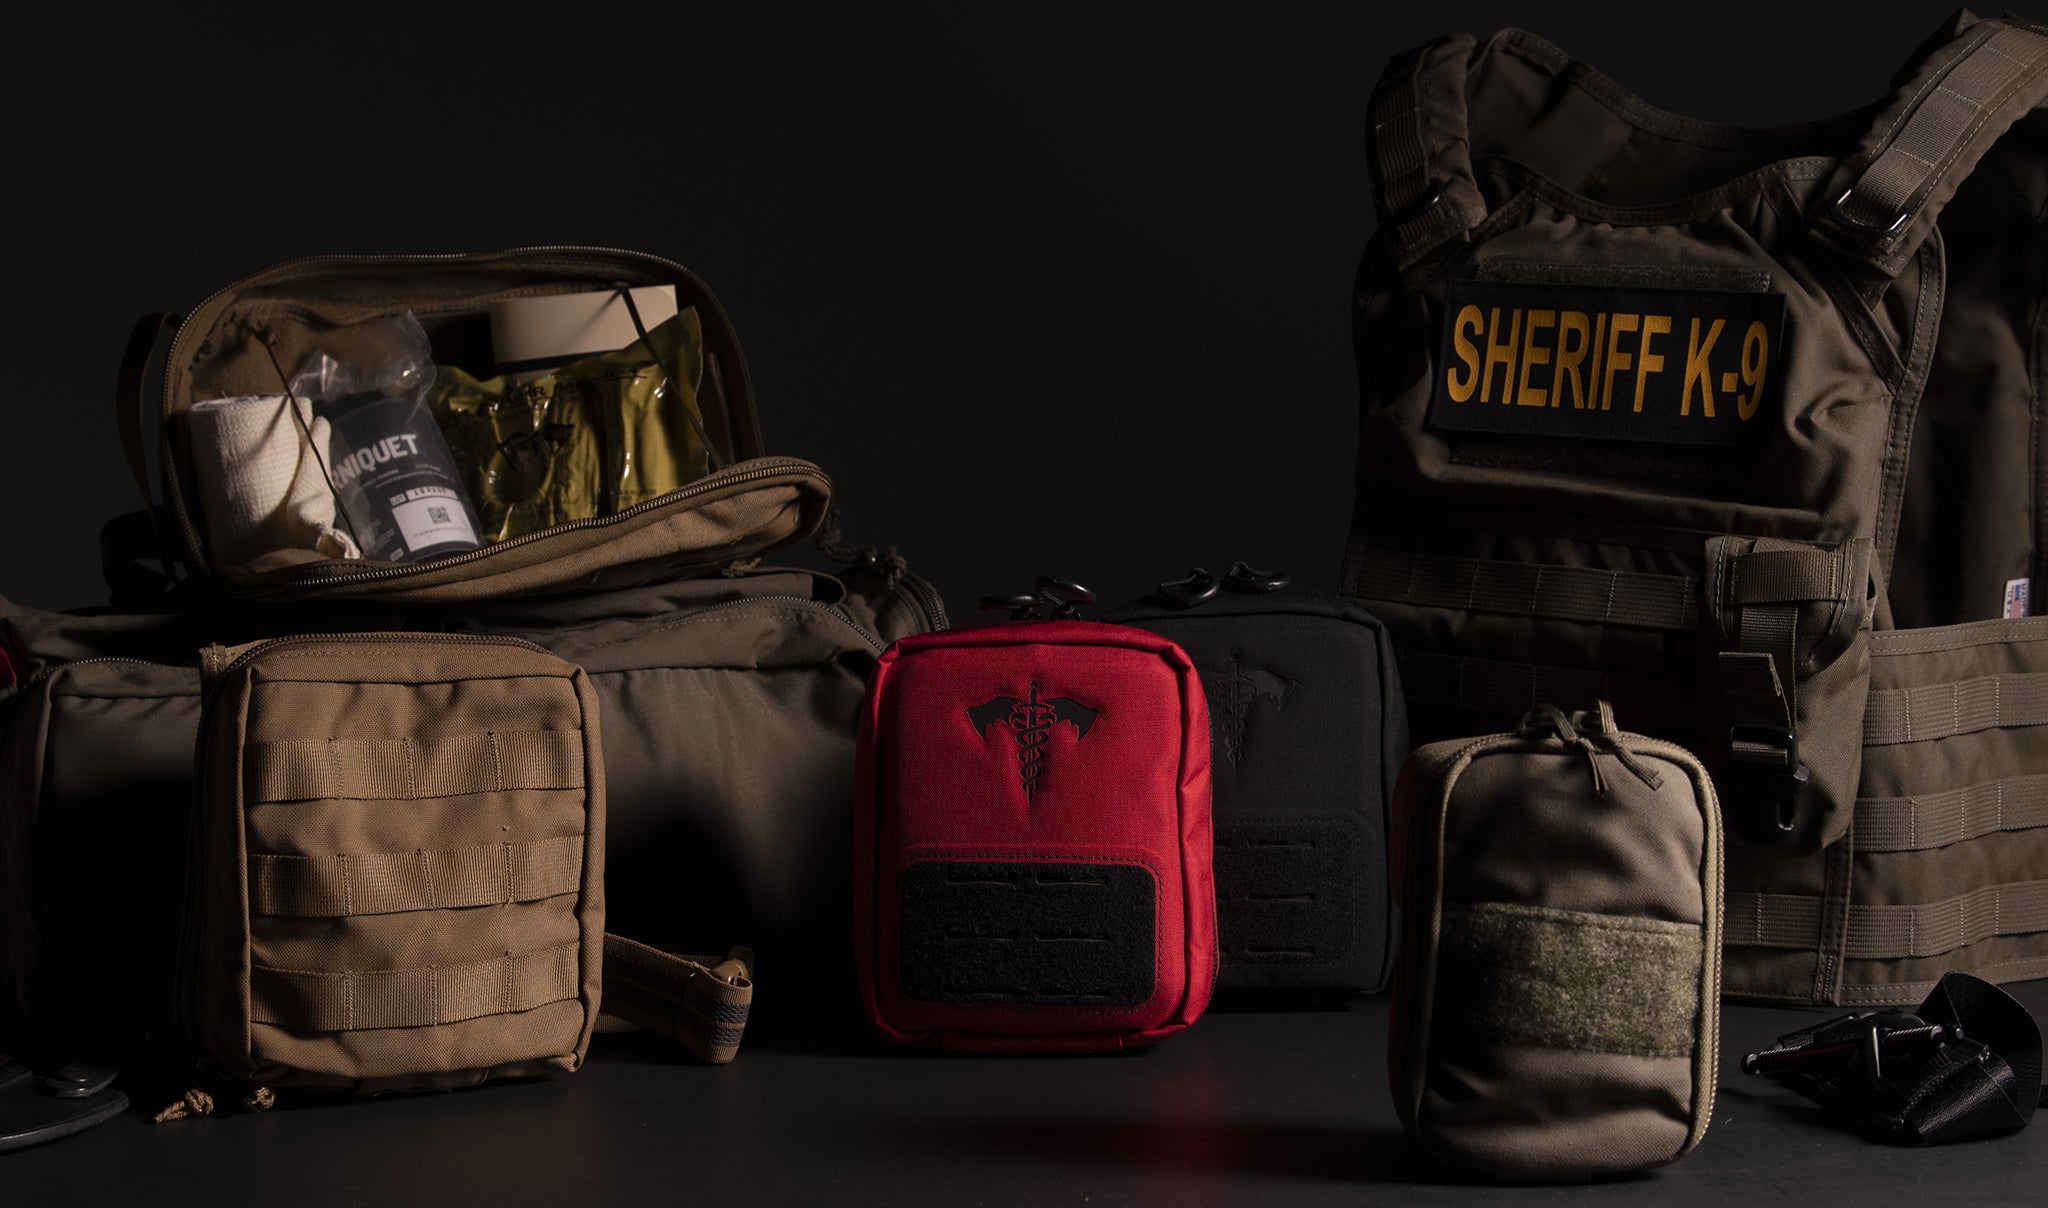 Outdoor Trauma Kit - Operator IFAK Version - Tan Pouch – TacMed Solutions™